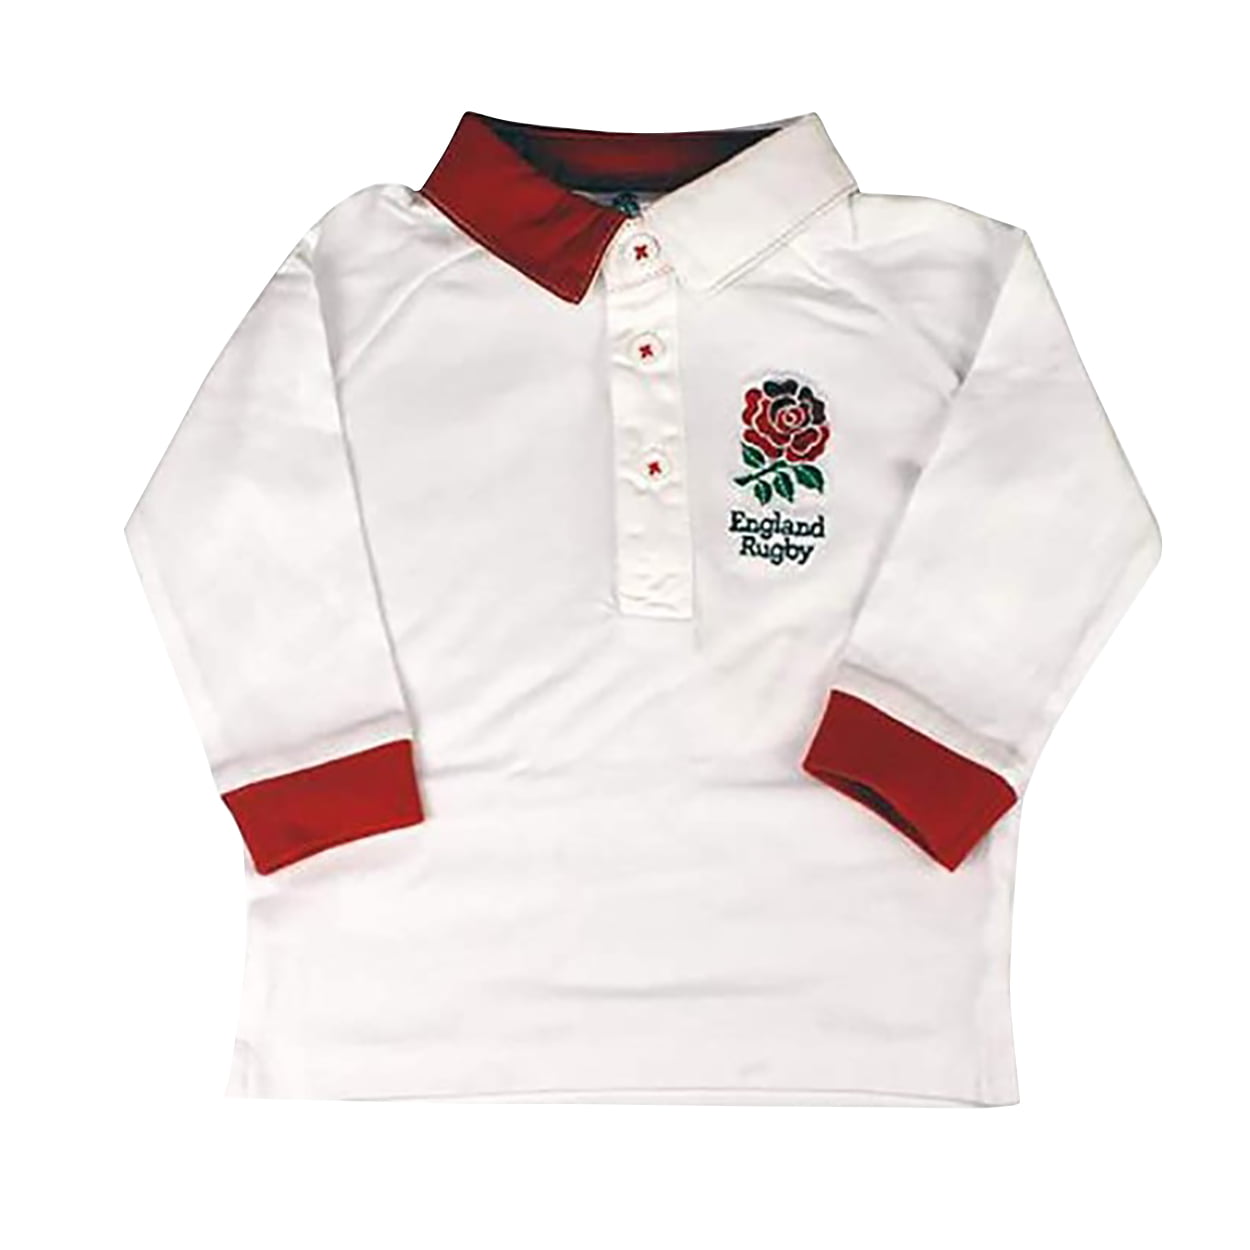 ENGLAND RUGBY UNION CLASSIC POLO SHIRT FOR MEN OFFICIAL LICENSED PRODUCT 